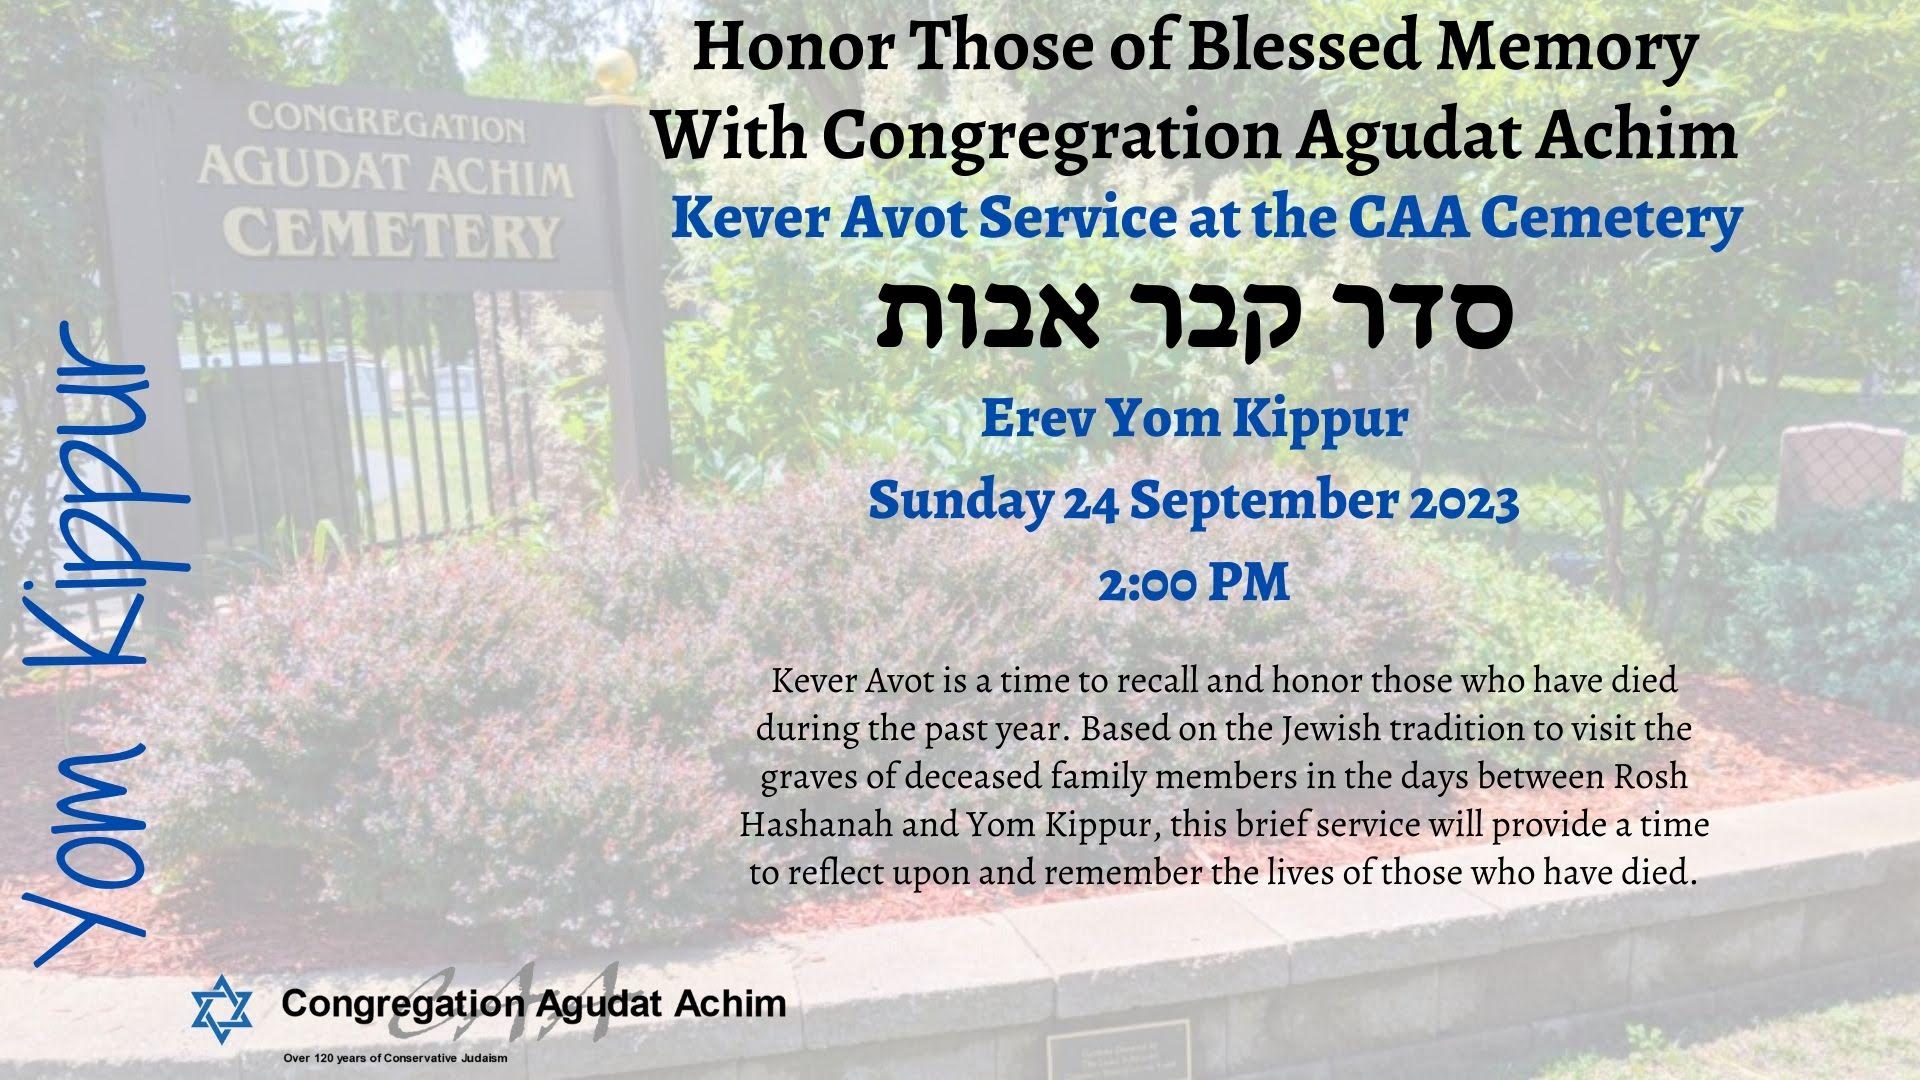 Honor Those of Blessed Memory With Congregation Agudat Achim